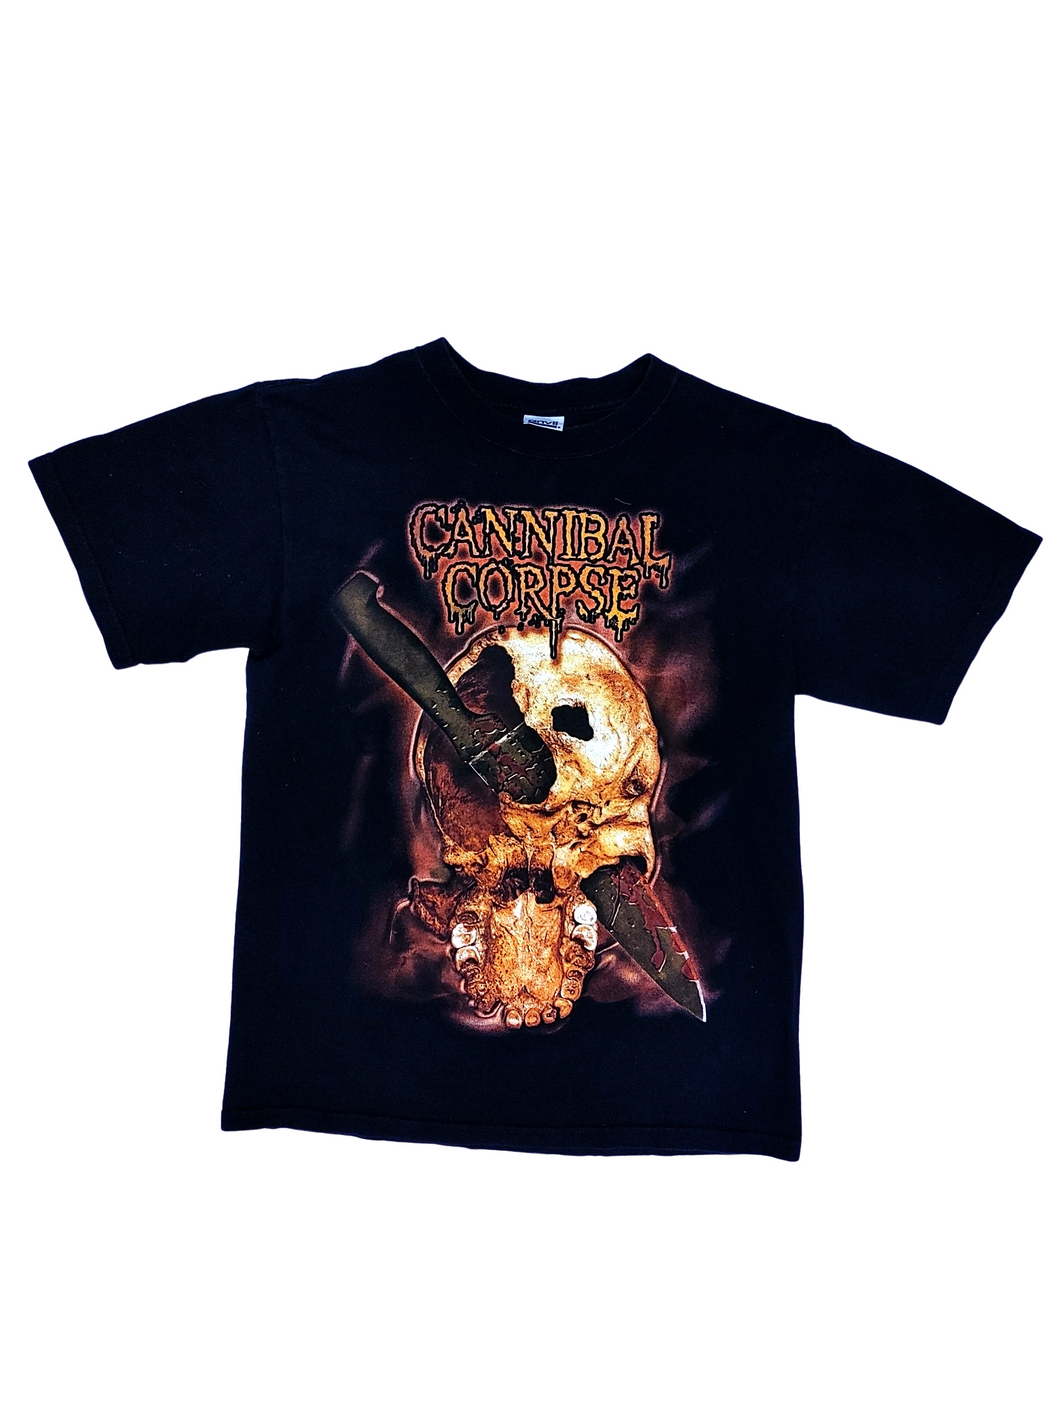 00s Cannibal Corpse Band T-Shirt -Size M